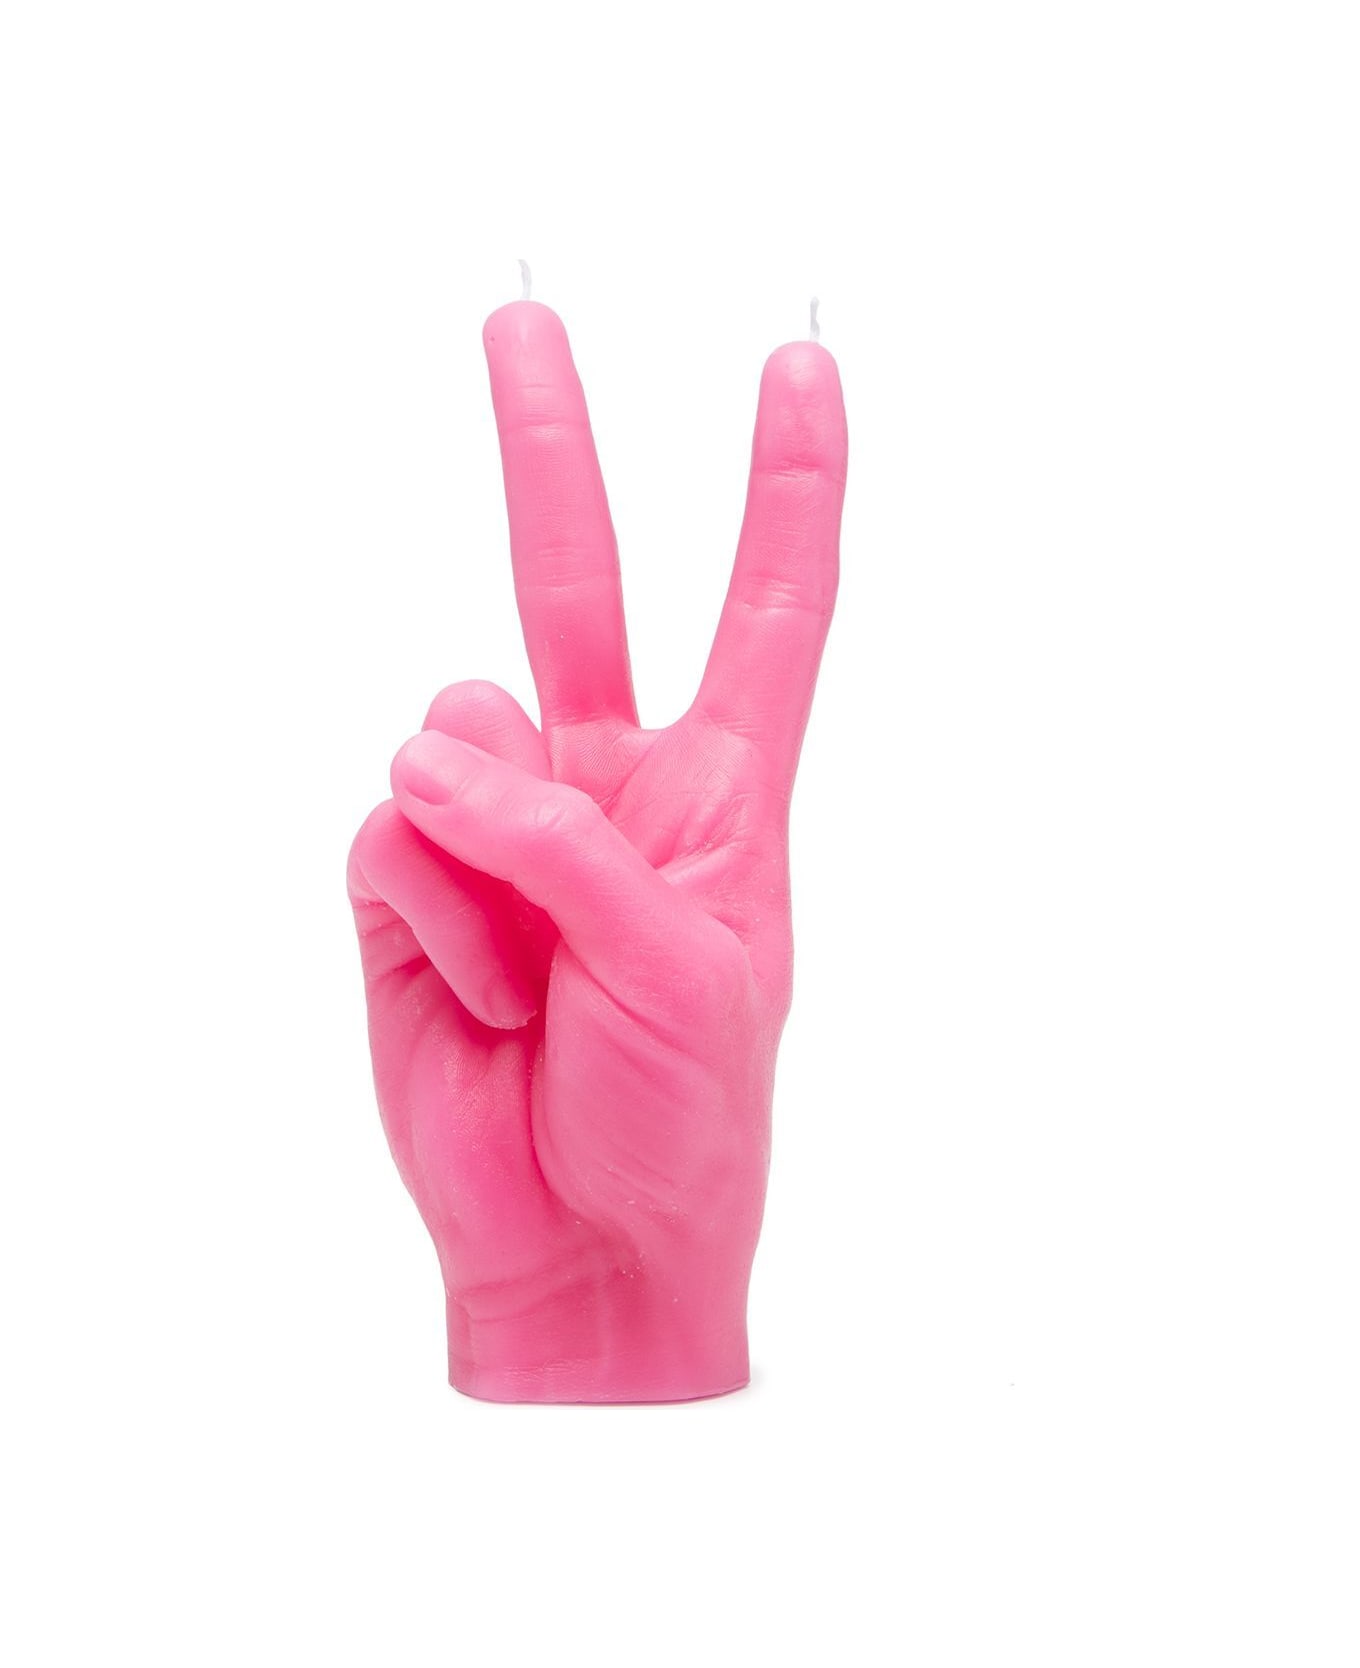 Candlehand Peace Candle - Pink